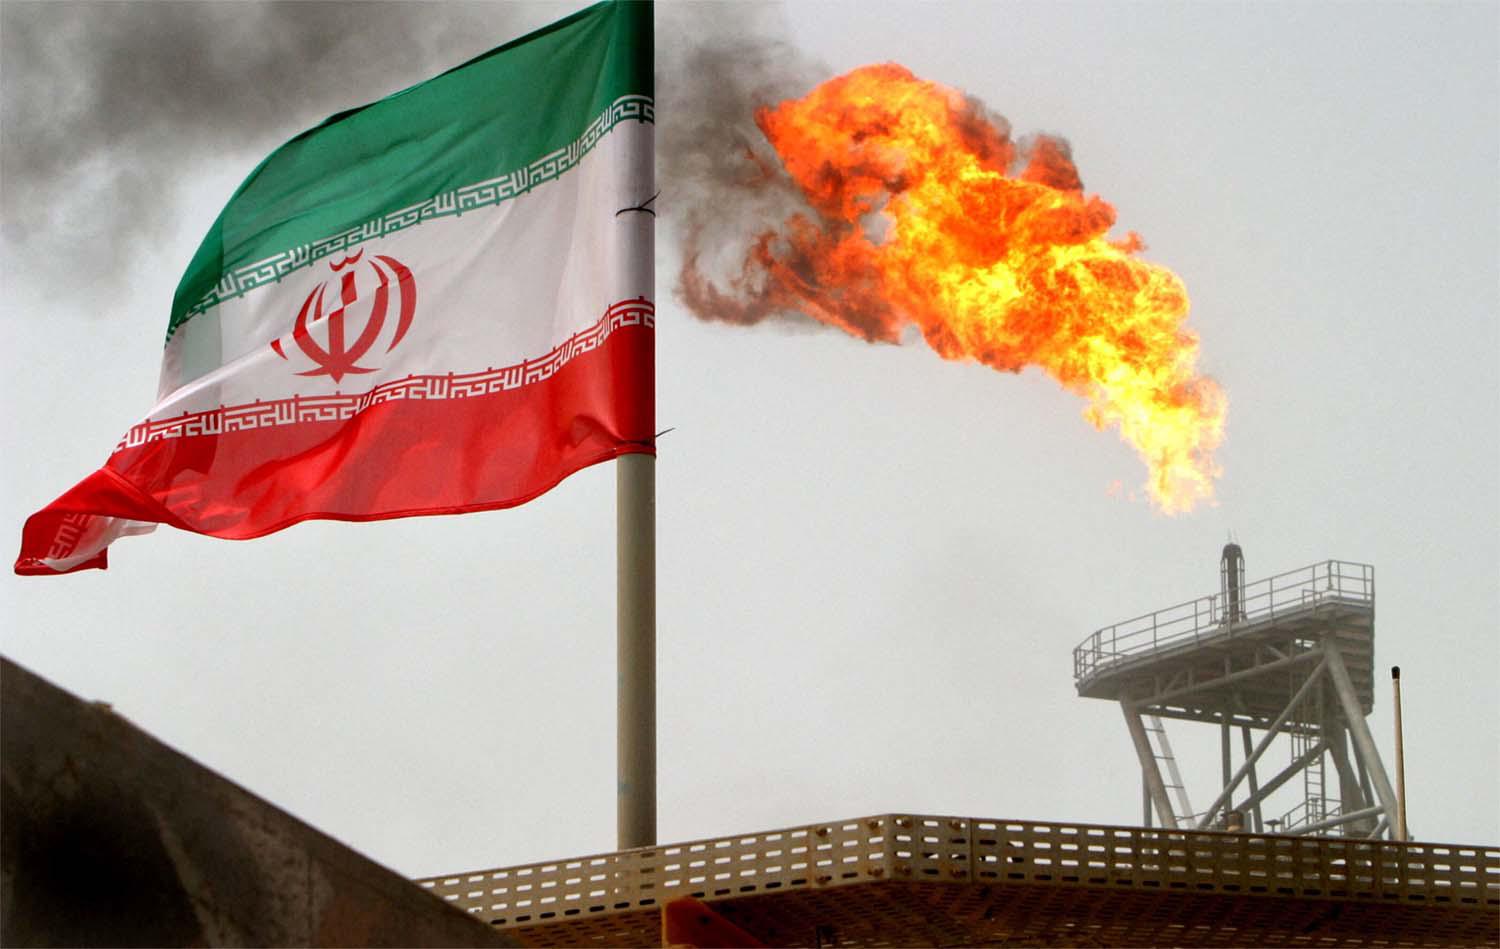 The cutback in Iranian oil makes up some 10% of China's crude imports 